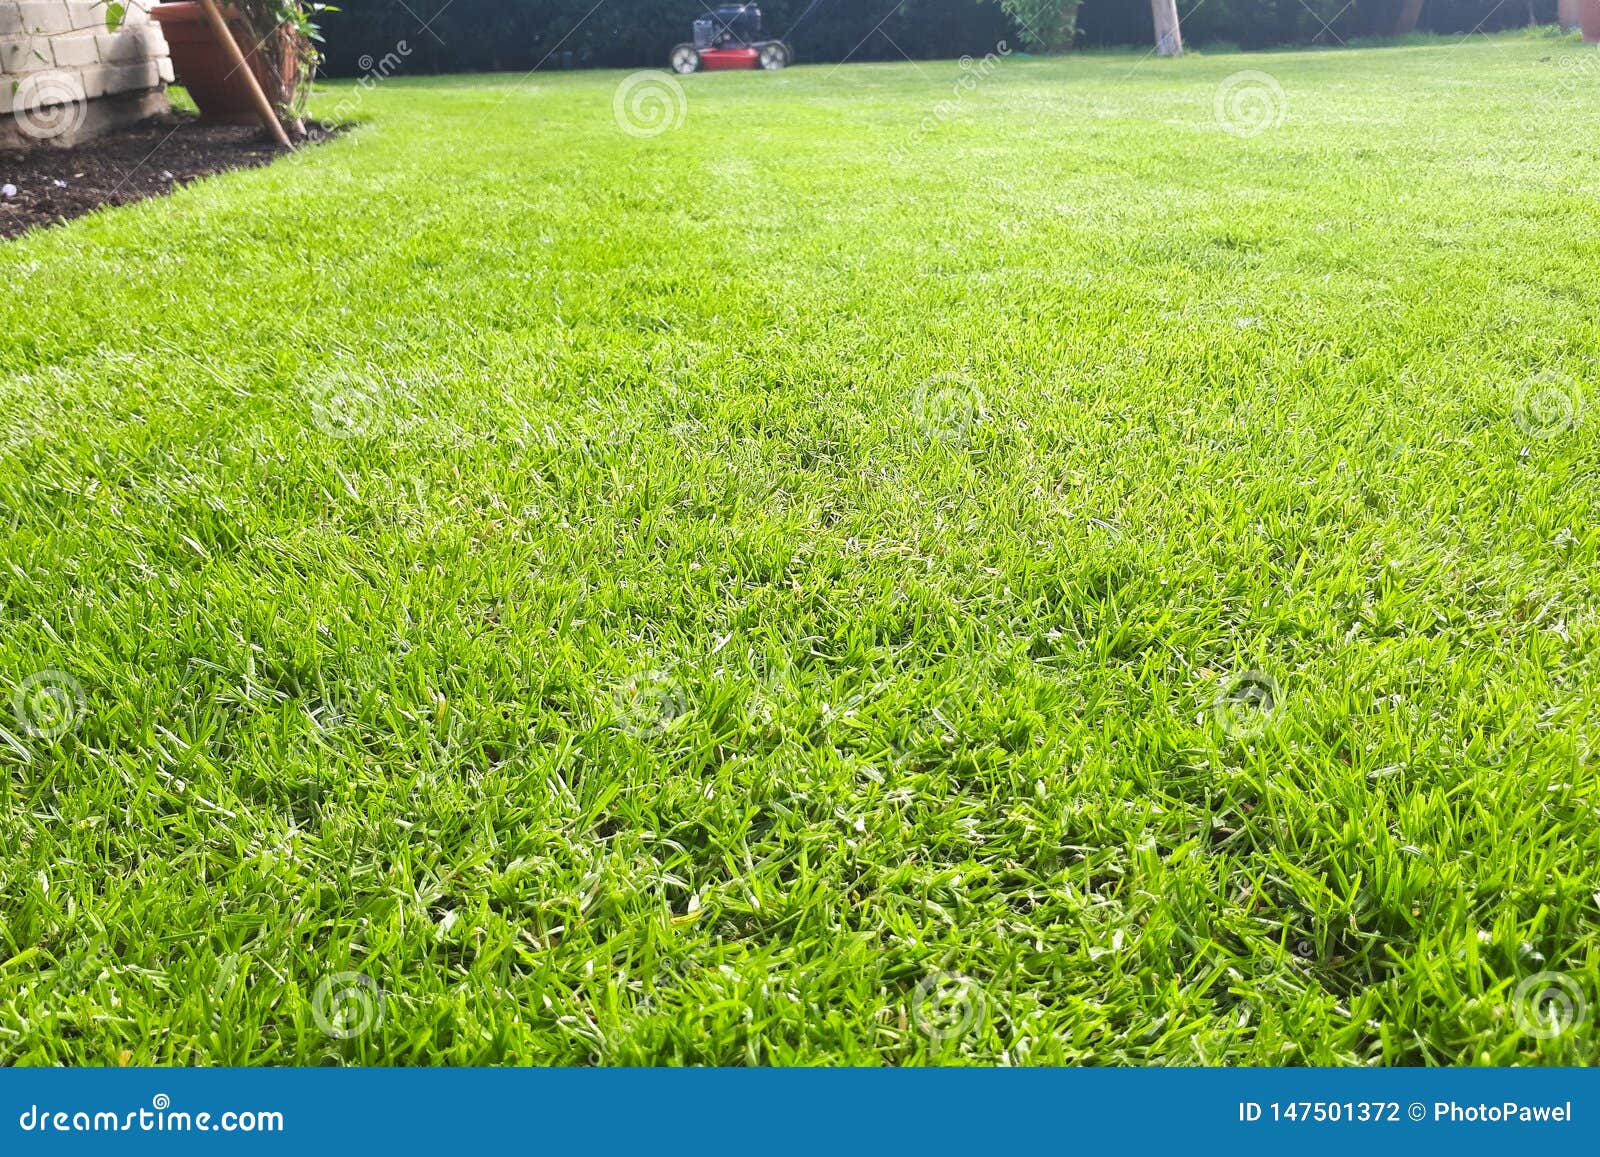 Home lawn freshly mowed. stock photo. Image of house - 147501372